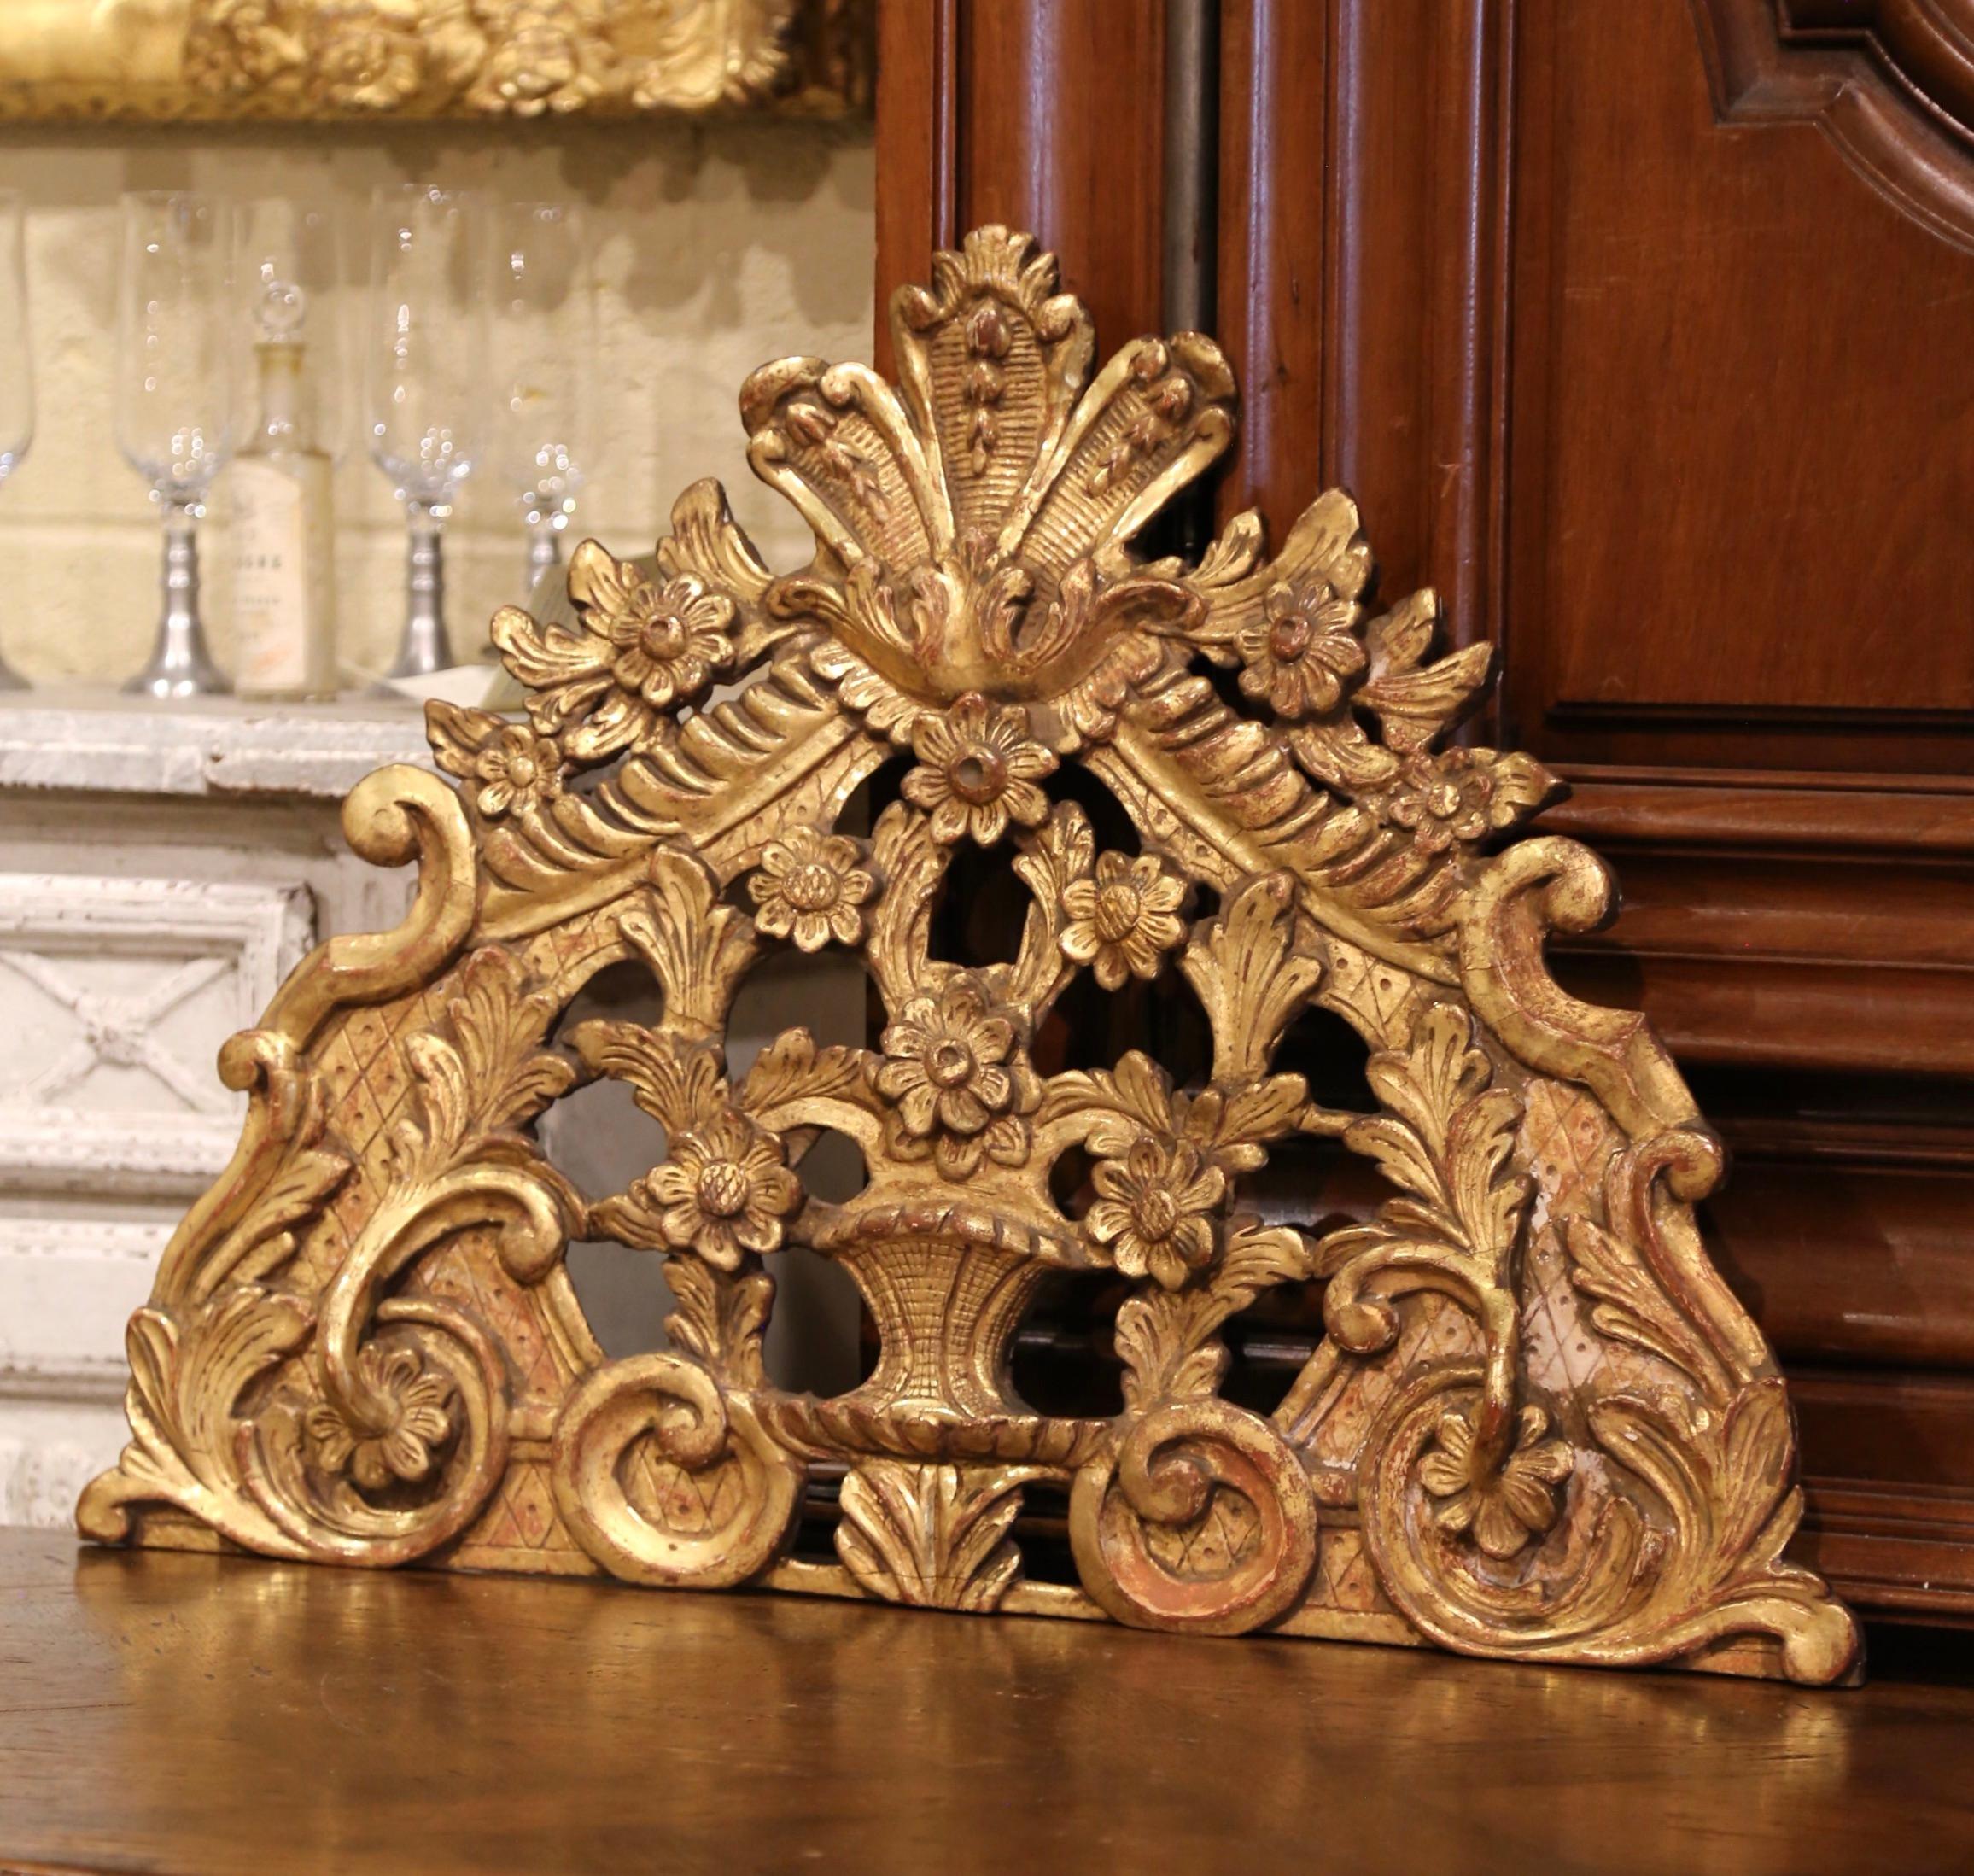 Decorate a study or an office with this antique carved gilt wood architectural sculpture. Crafted in France, circa 1850, the elegant wall-mounted crest features exquisite carvings including scrolled decor, floral and leaf motifs in high relief, and